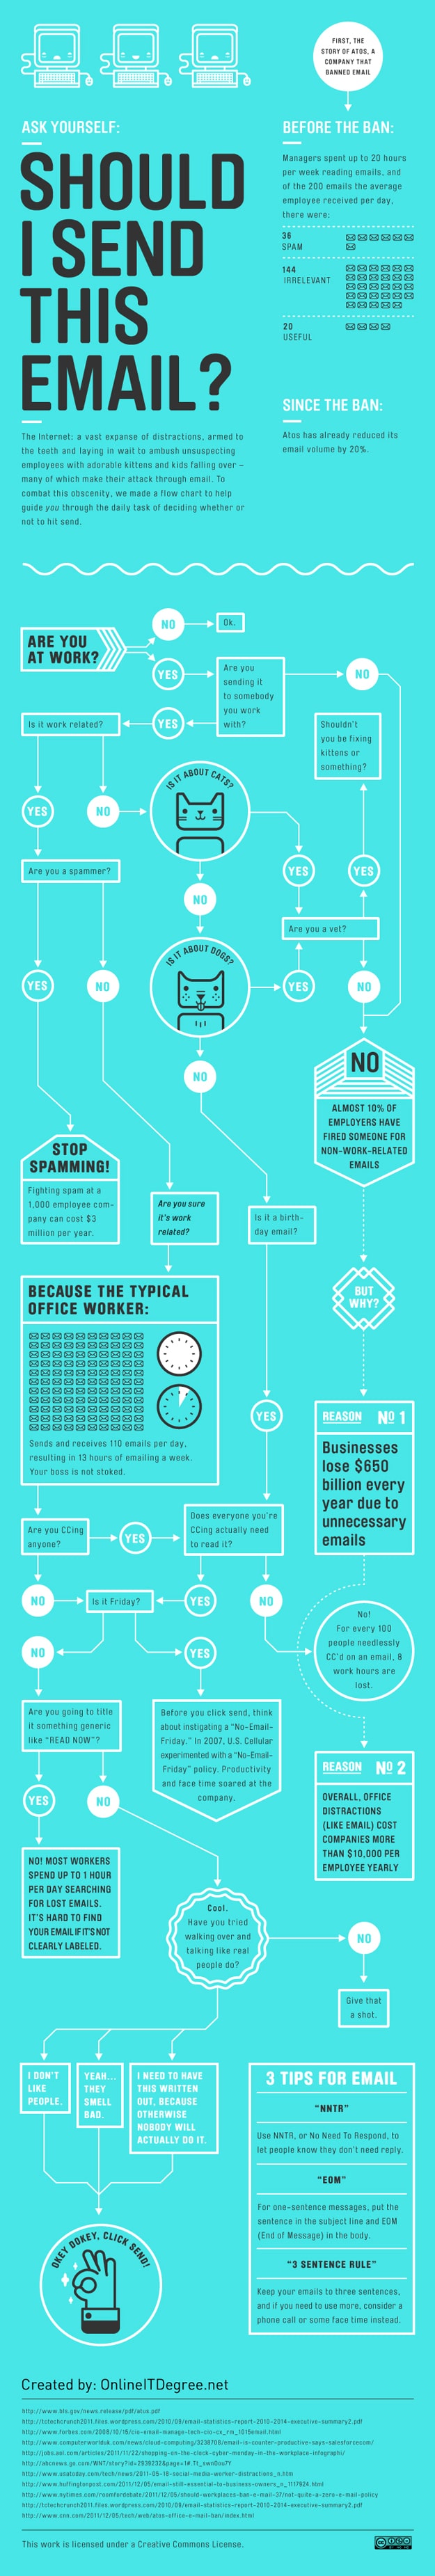 Email Overload: Should You Really Send That Email? [Infographic]